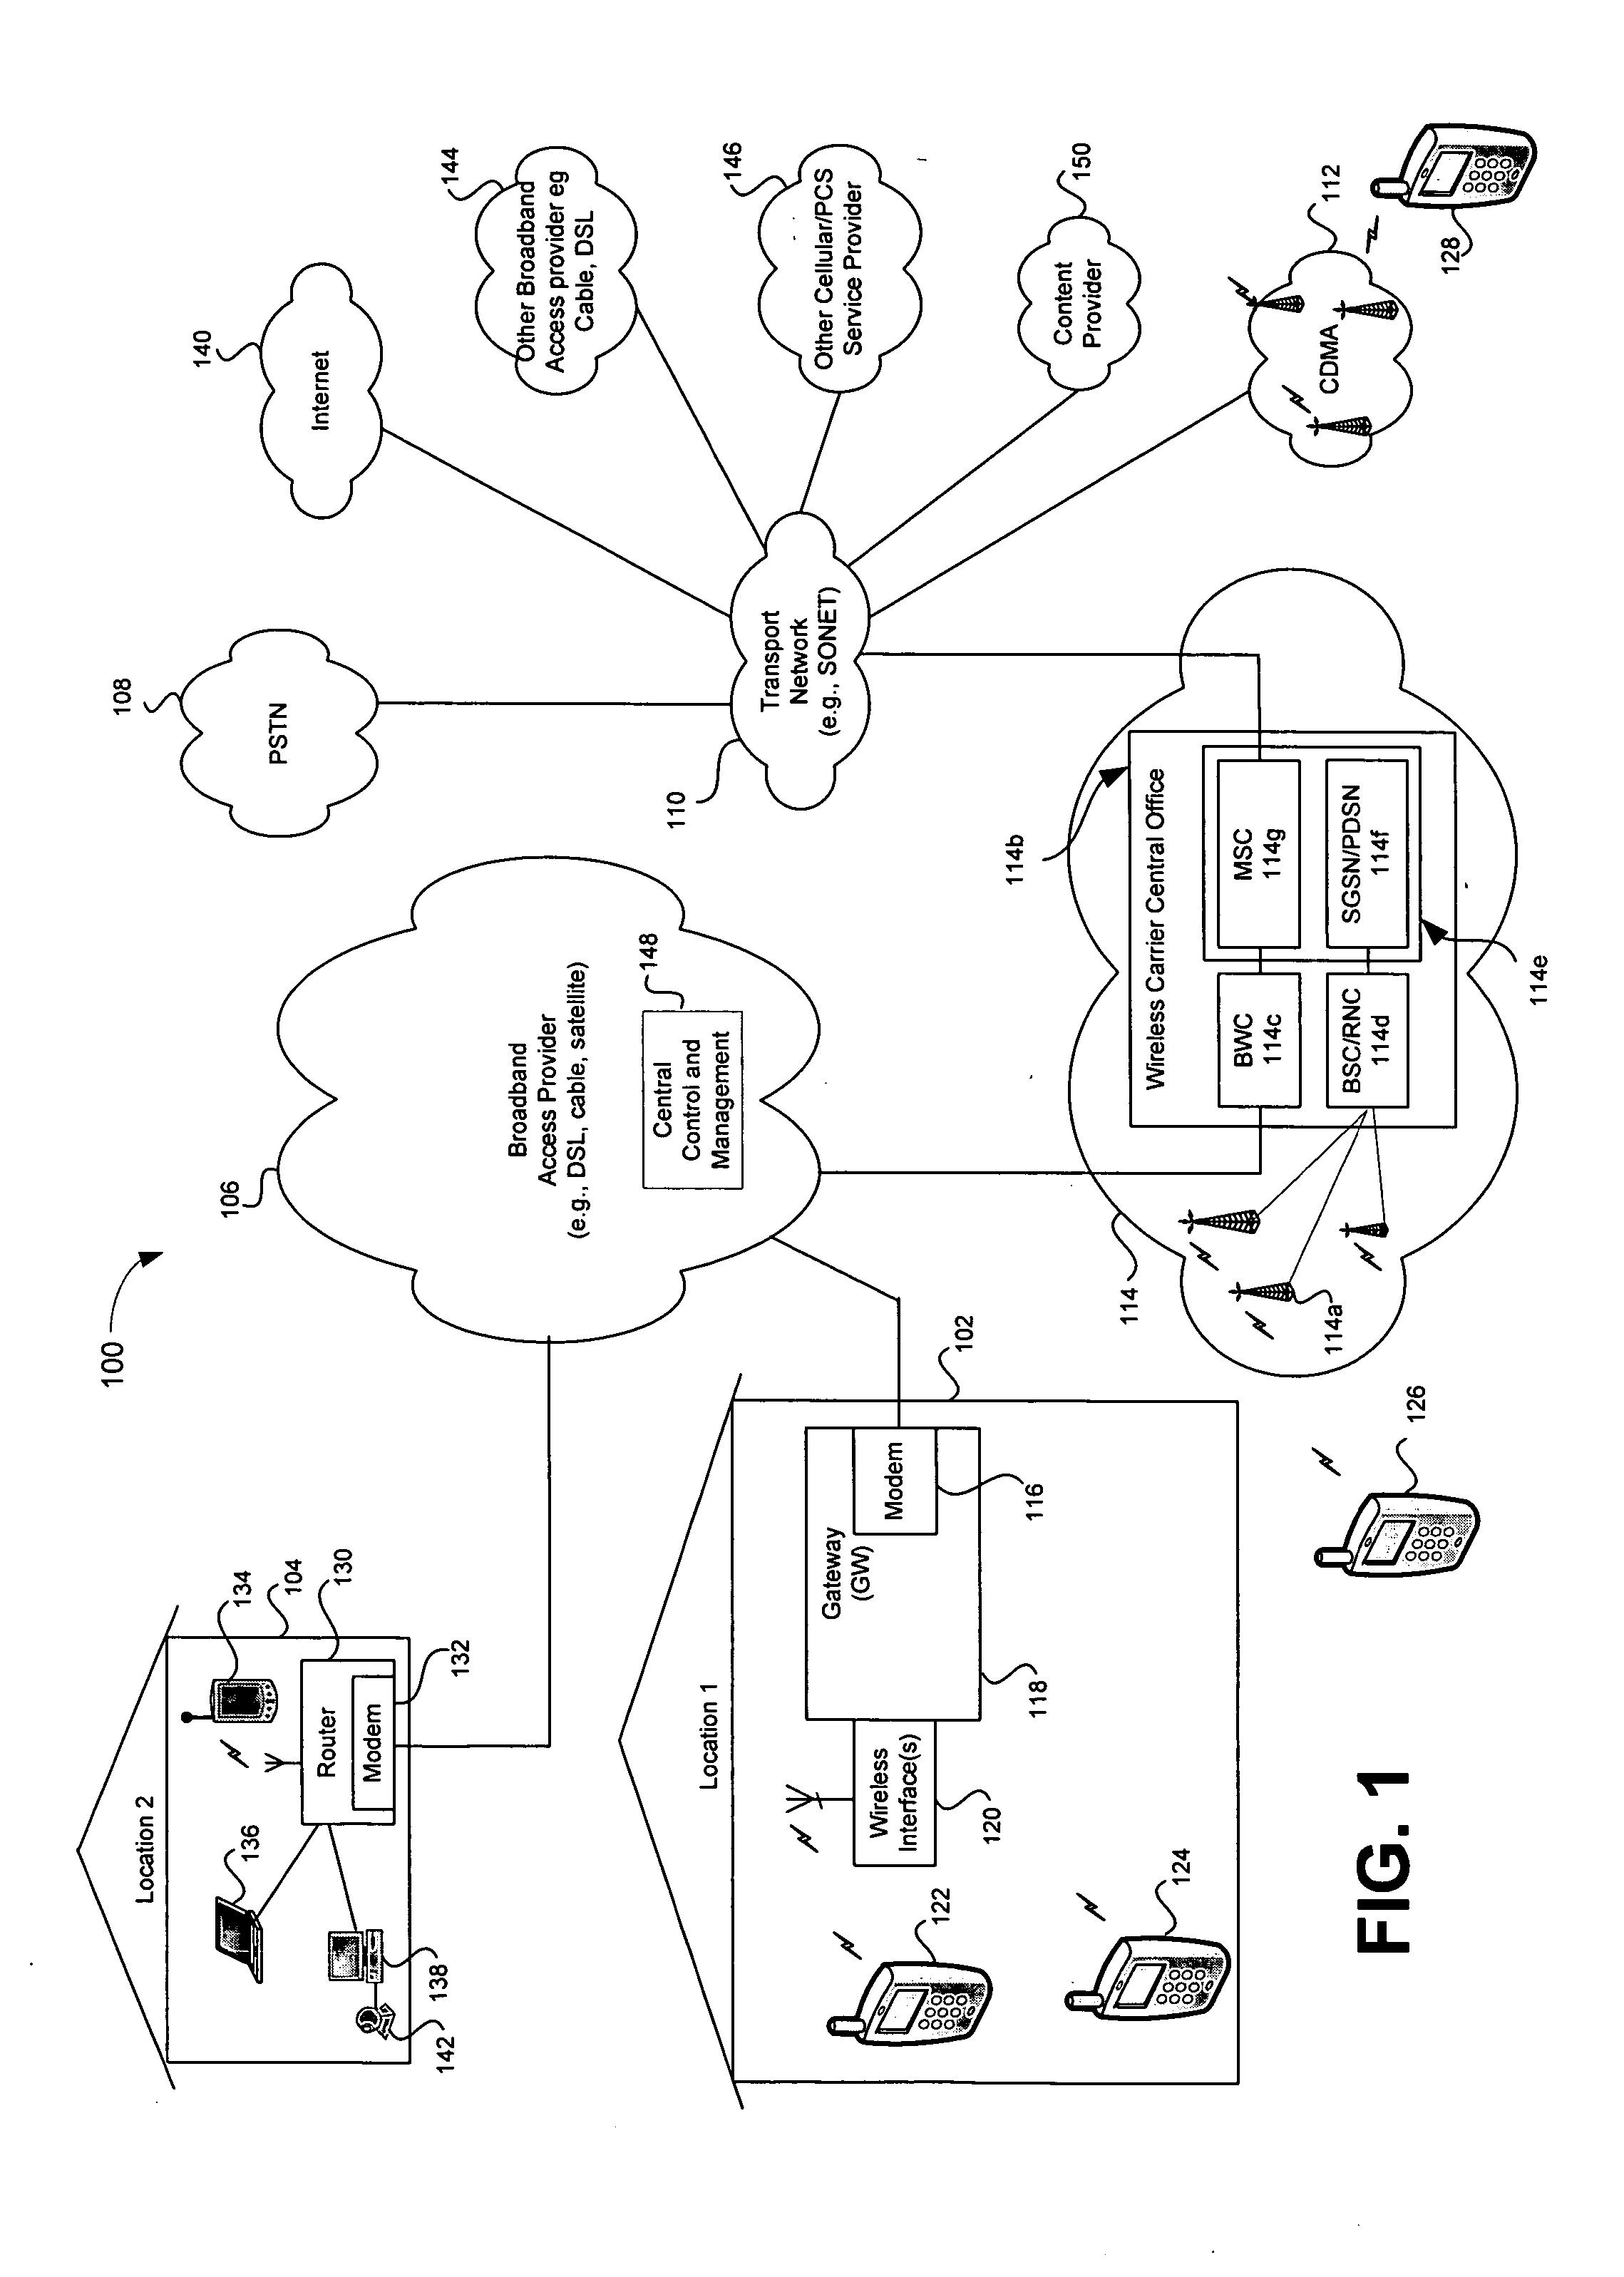 Method and system for providing registration, authentication and access via broadband access gateway